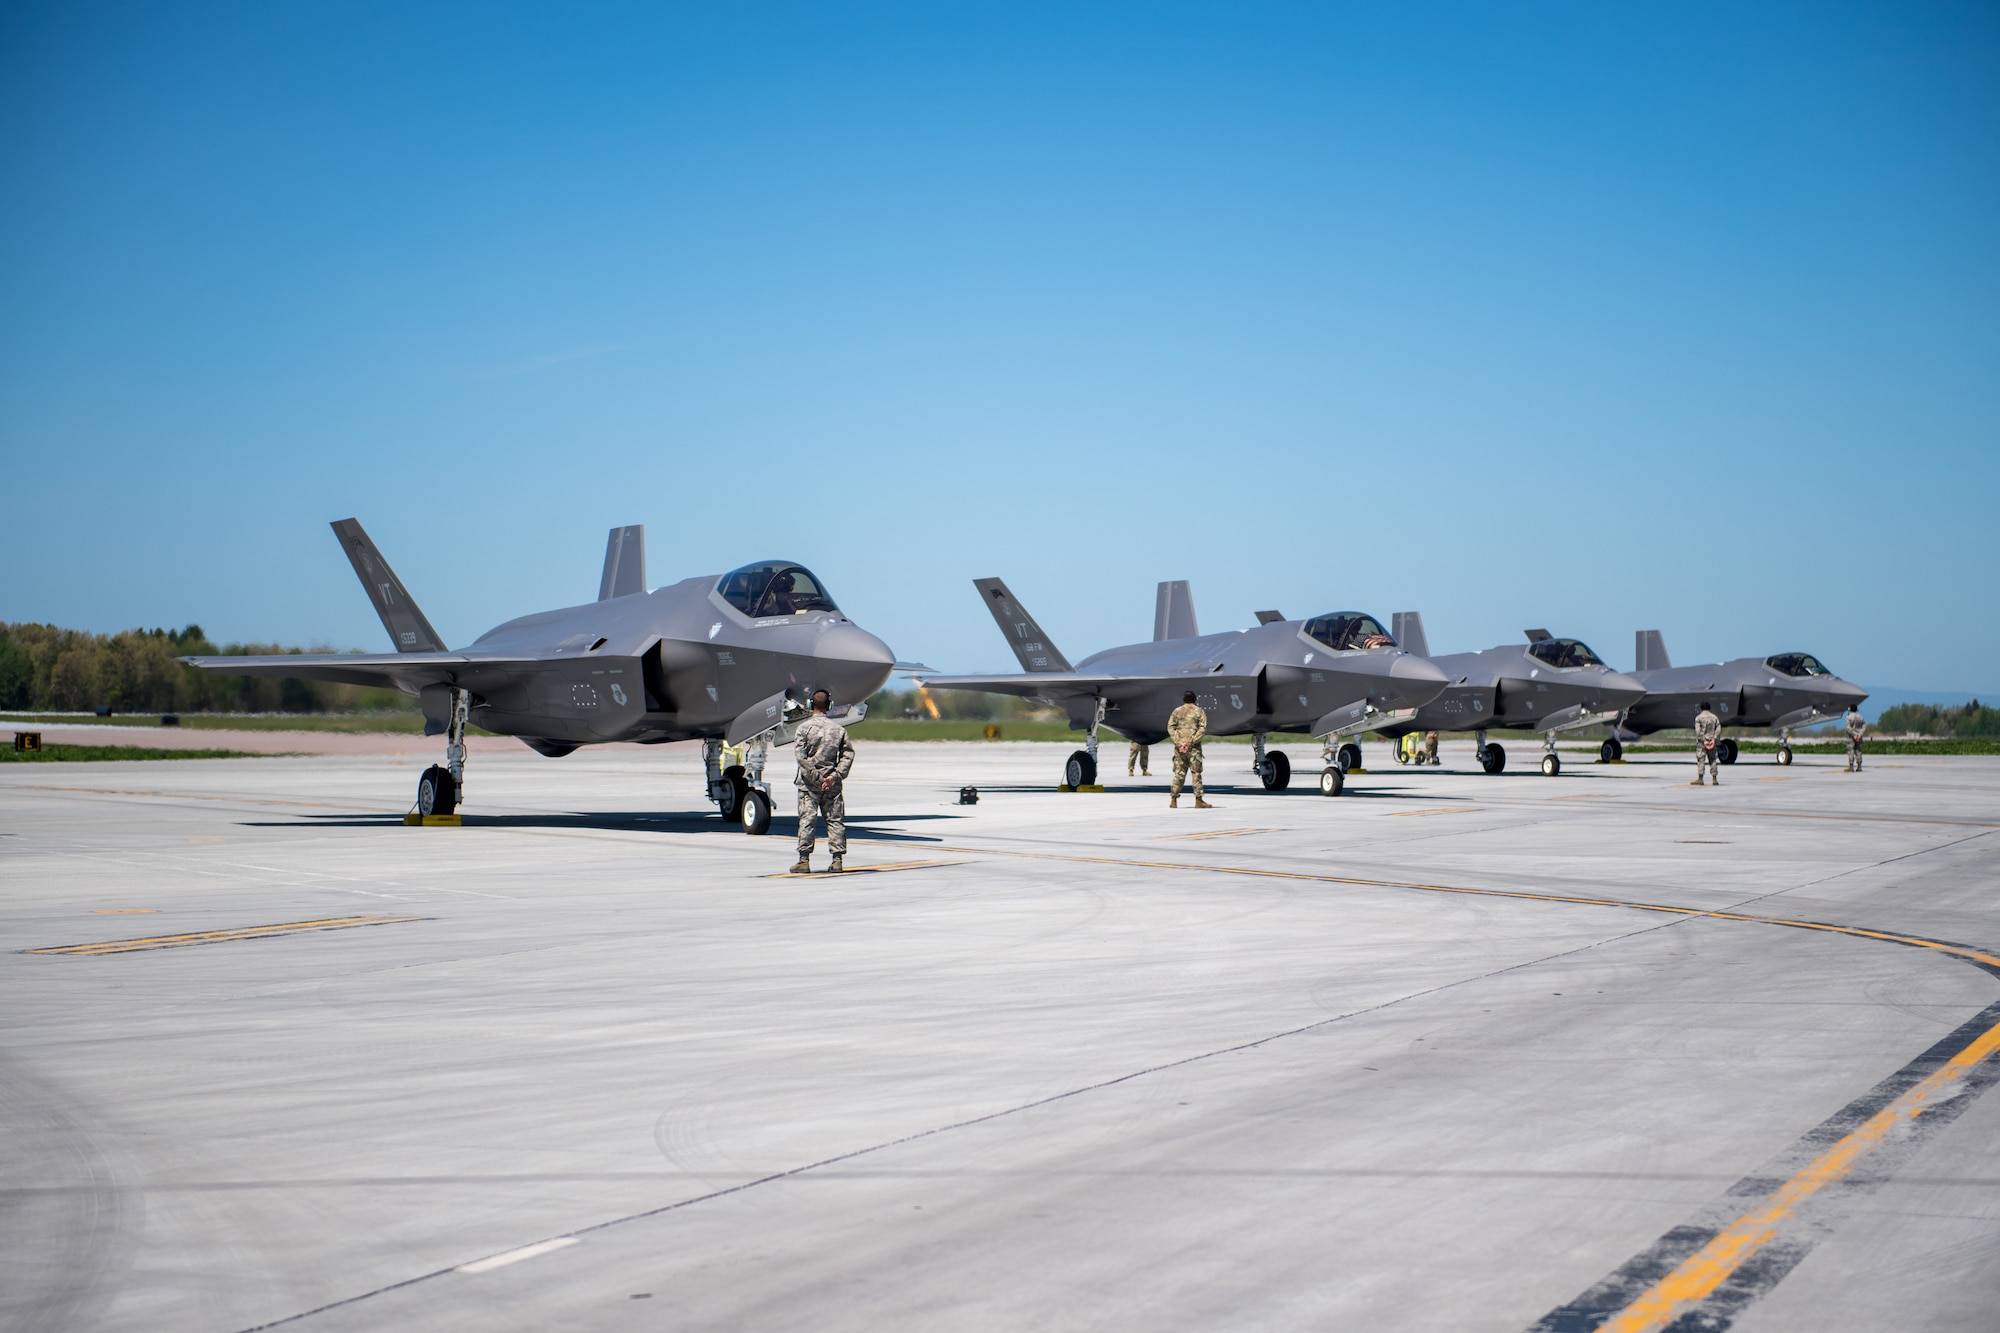 Four F-35s assigned to the 158th Fighter Wing prepare for launch from the Vermont Air National Guard Base, honoring Vermont’s front line COVID-19 responders and essential workers with a statewide flyover.